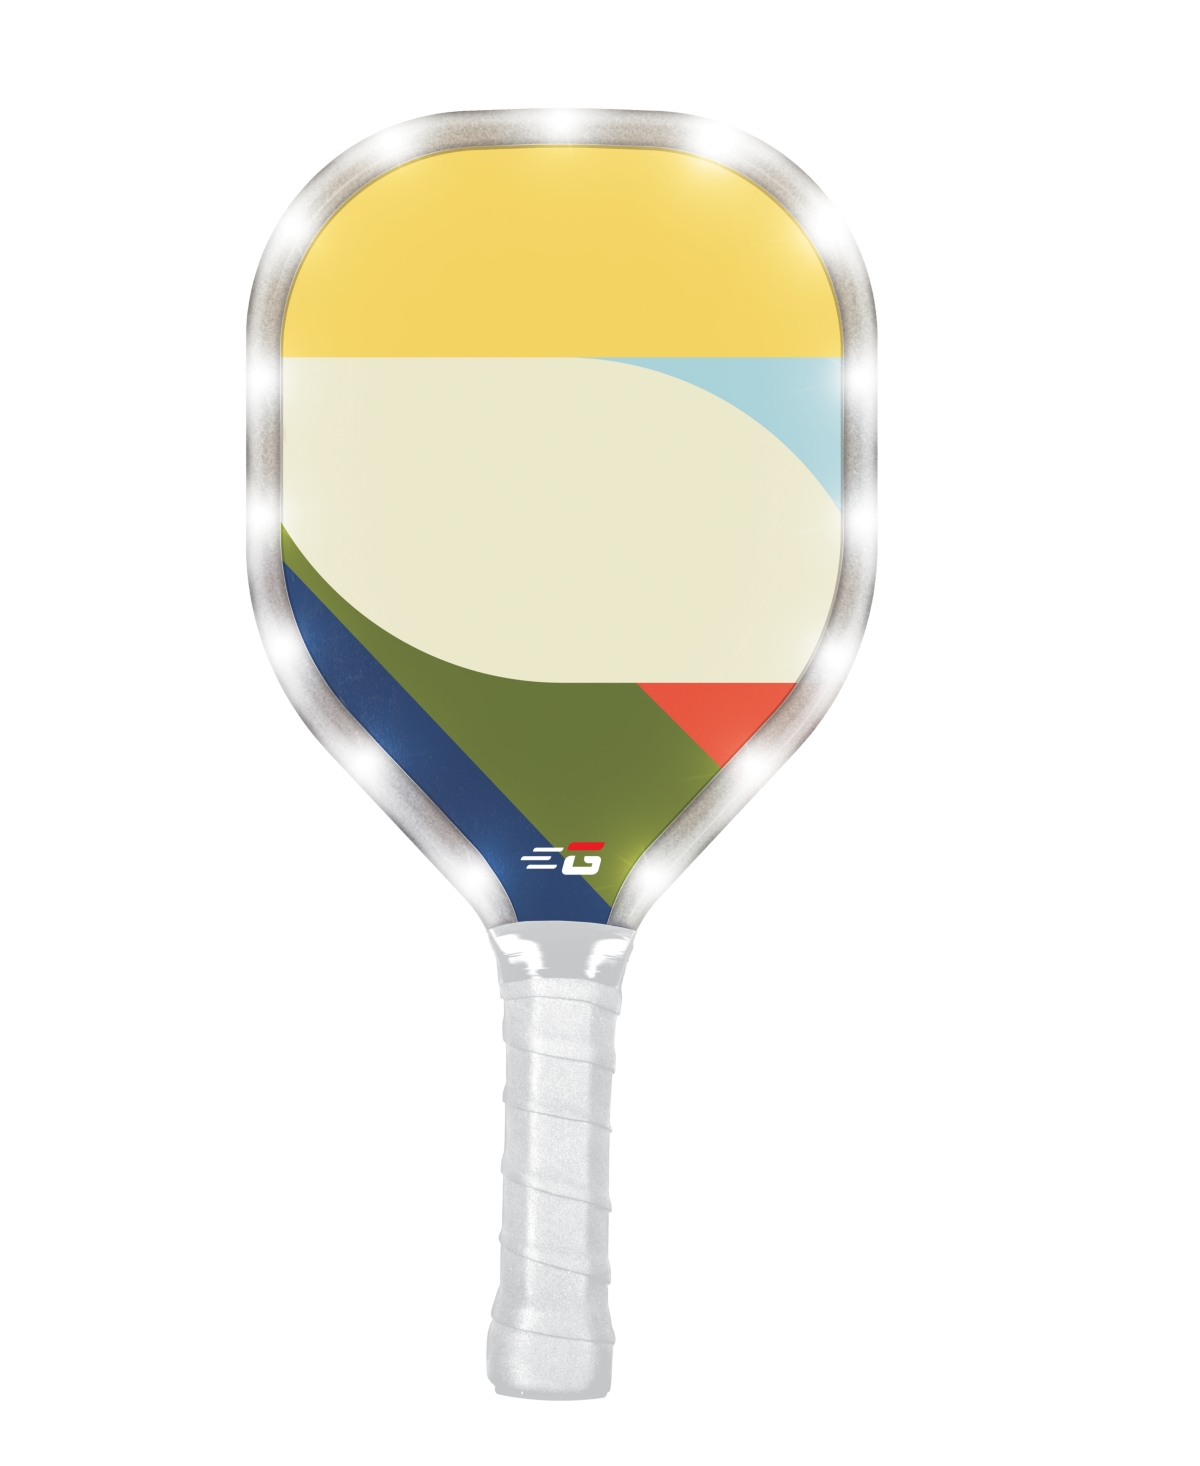 Genesis Led Pickle Ball Set Of 4, Color Block, Created For Macy's